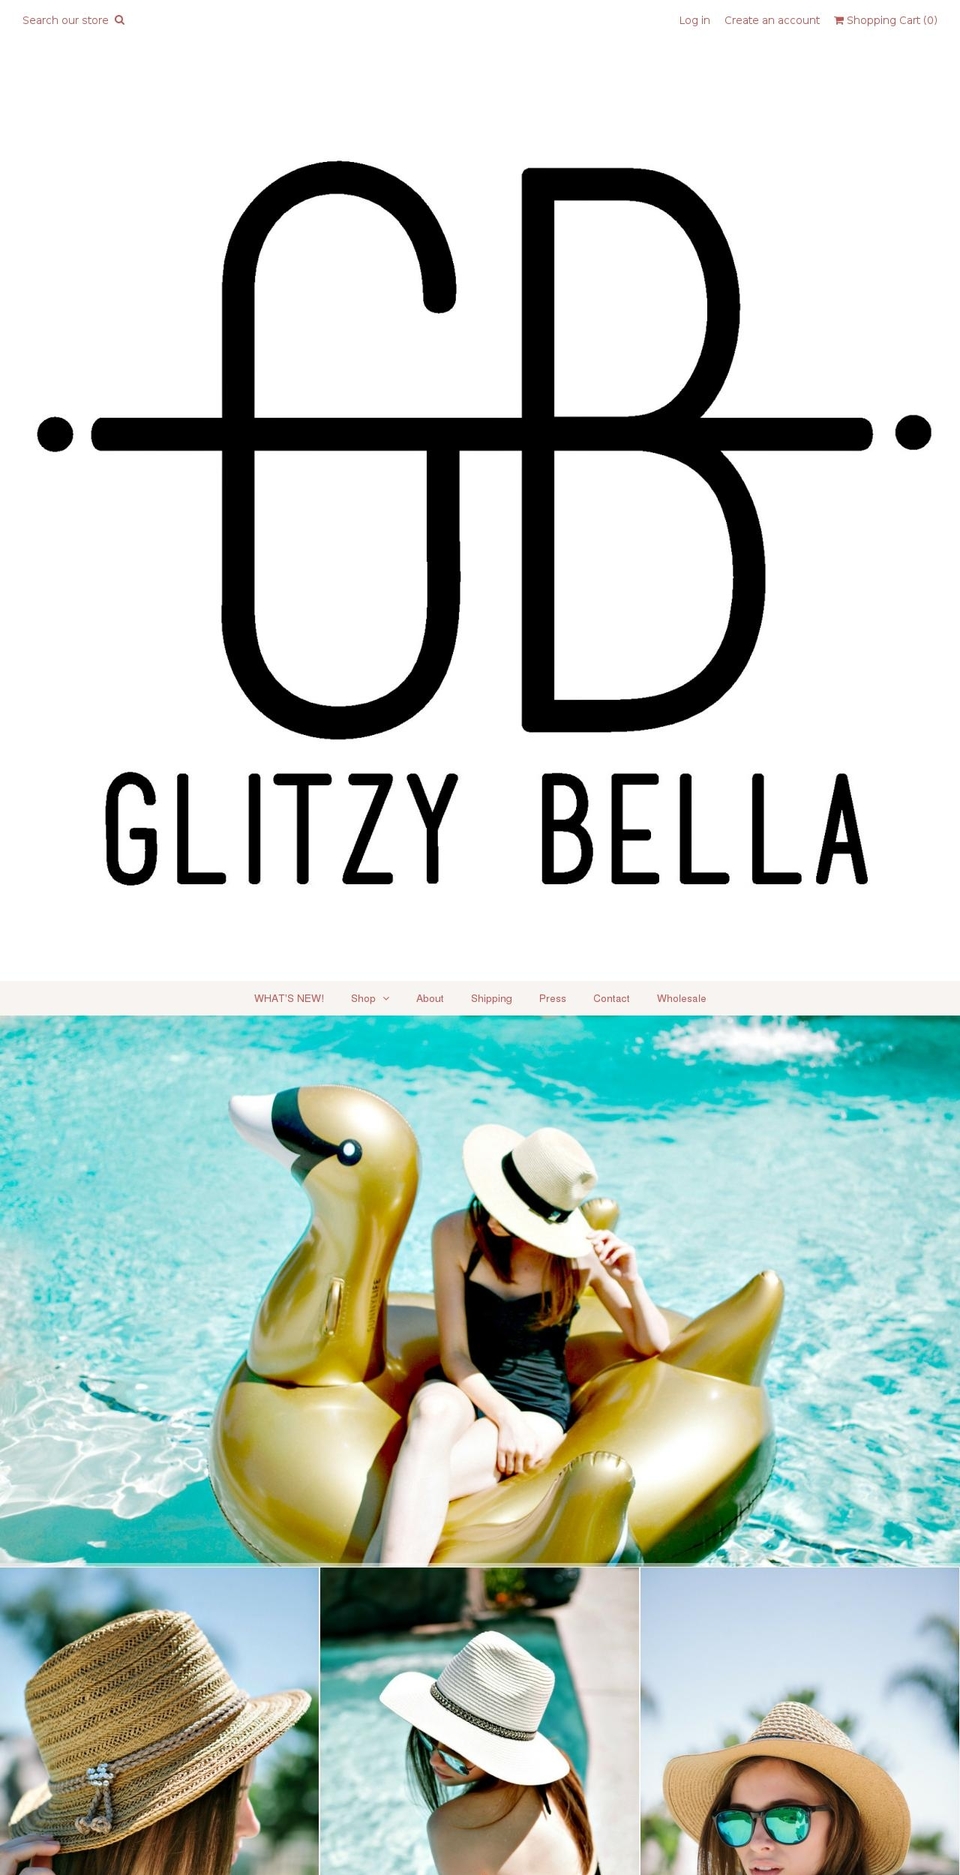 Weekend Shopify theme site example glitzybella.com